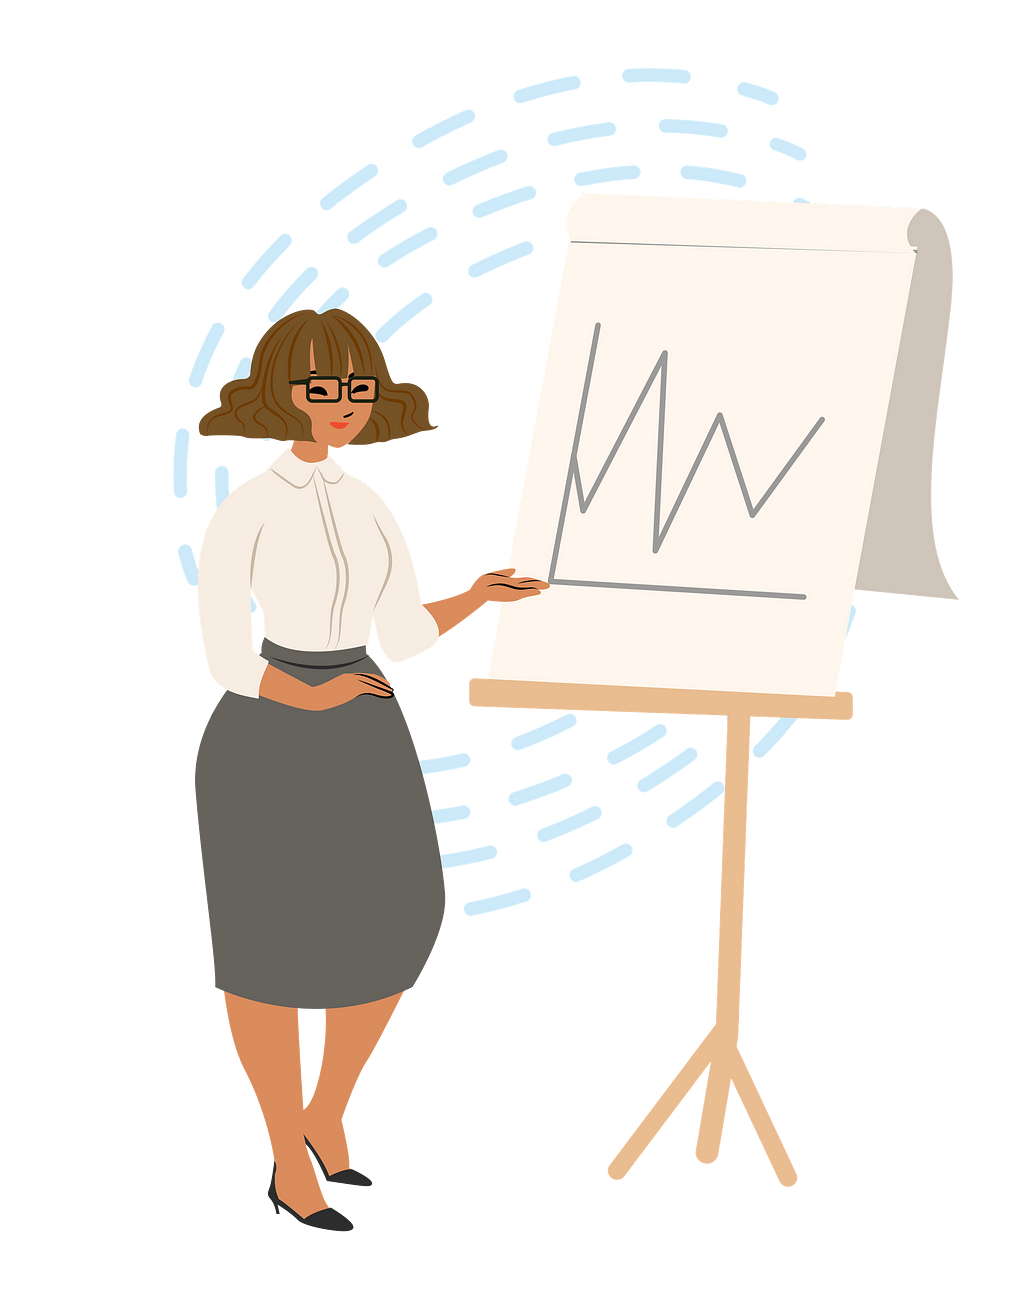 Illustration of a woman giving a presentation.